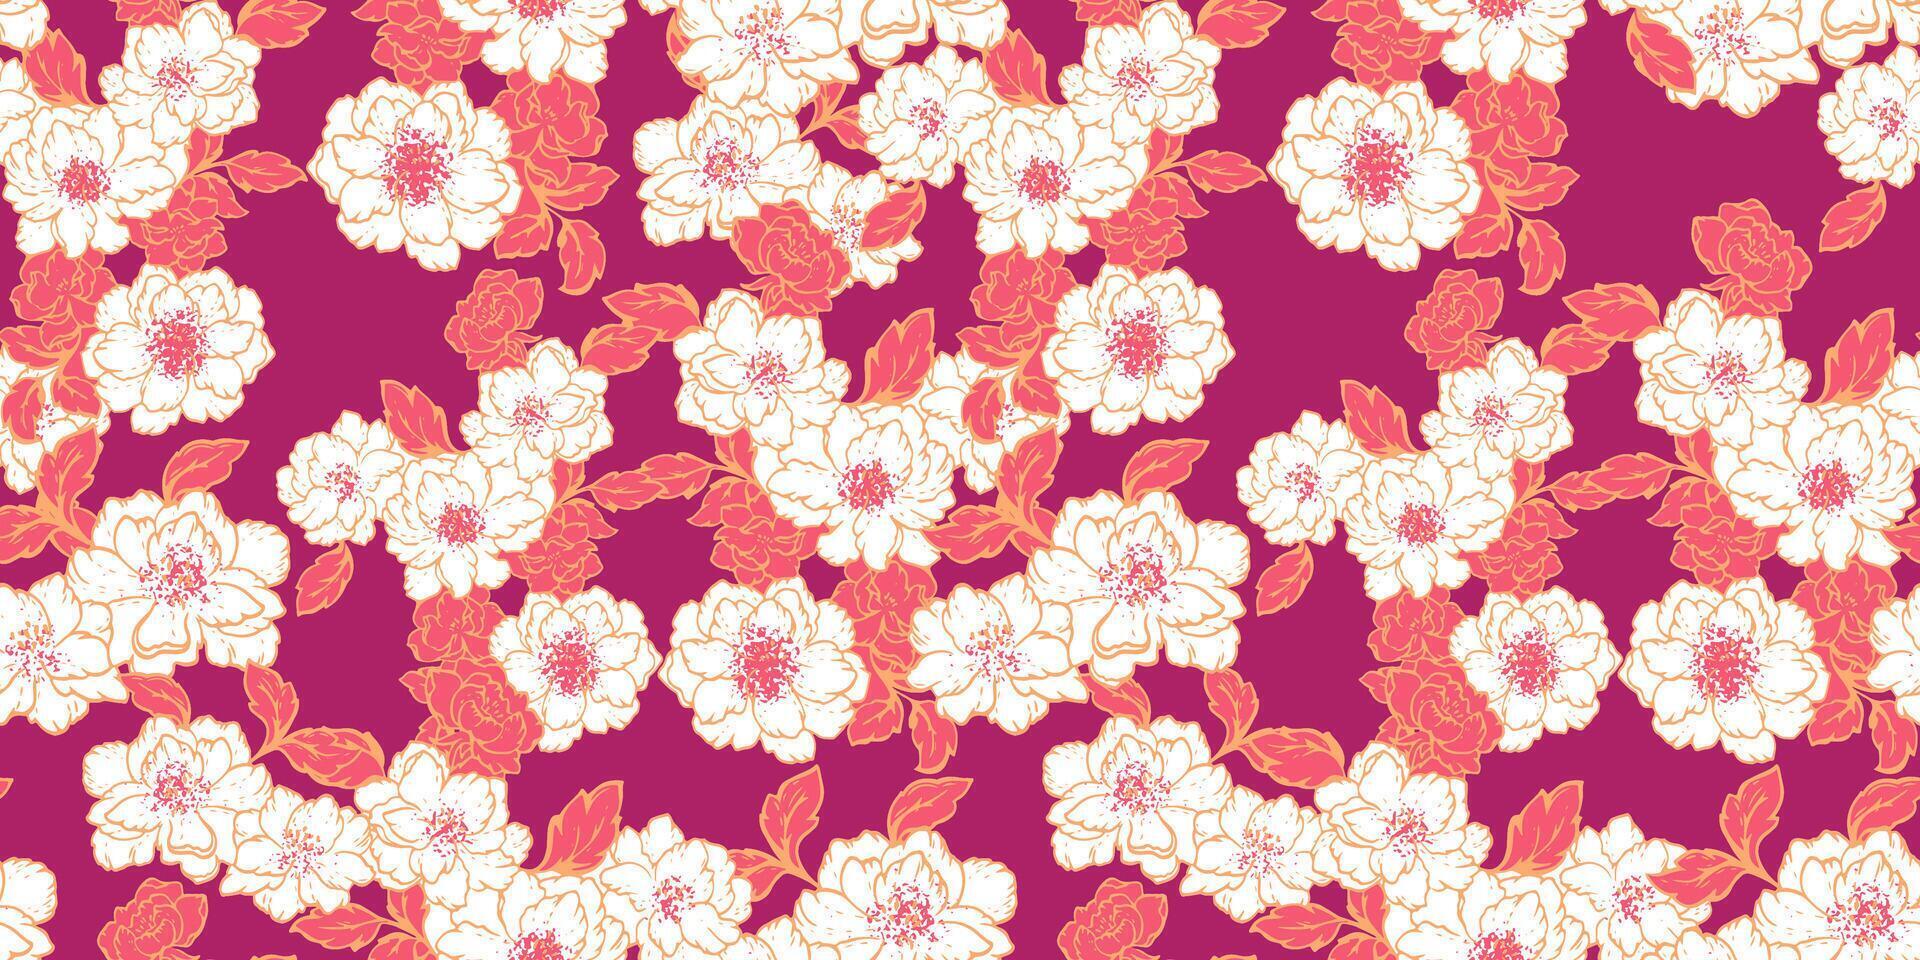 Artistic creative floral tapestry seamless pattern. Blooming spring or summer meadow background. Vector hand drawn abstract stylized plants and flowers, peonies. Template for design, print, fashion